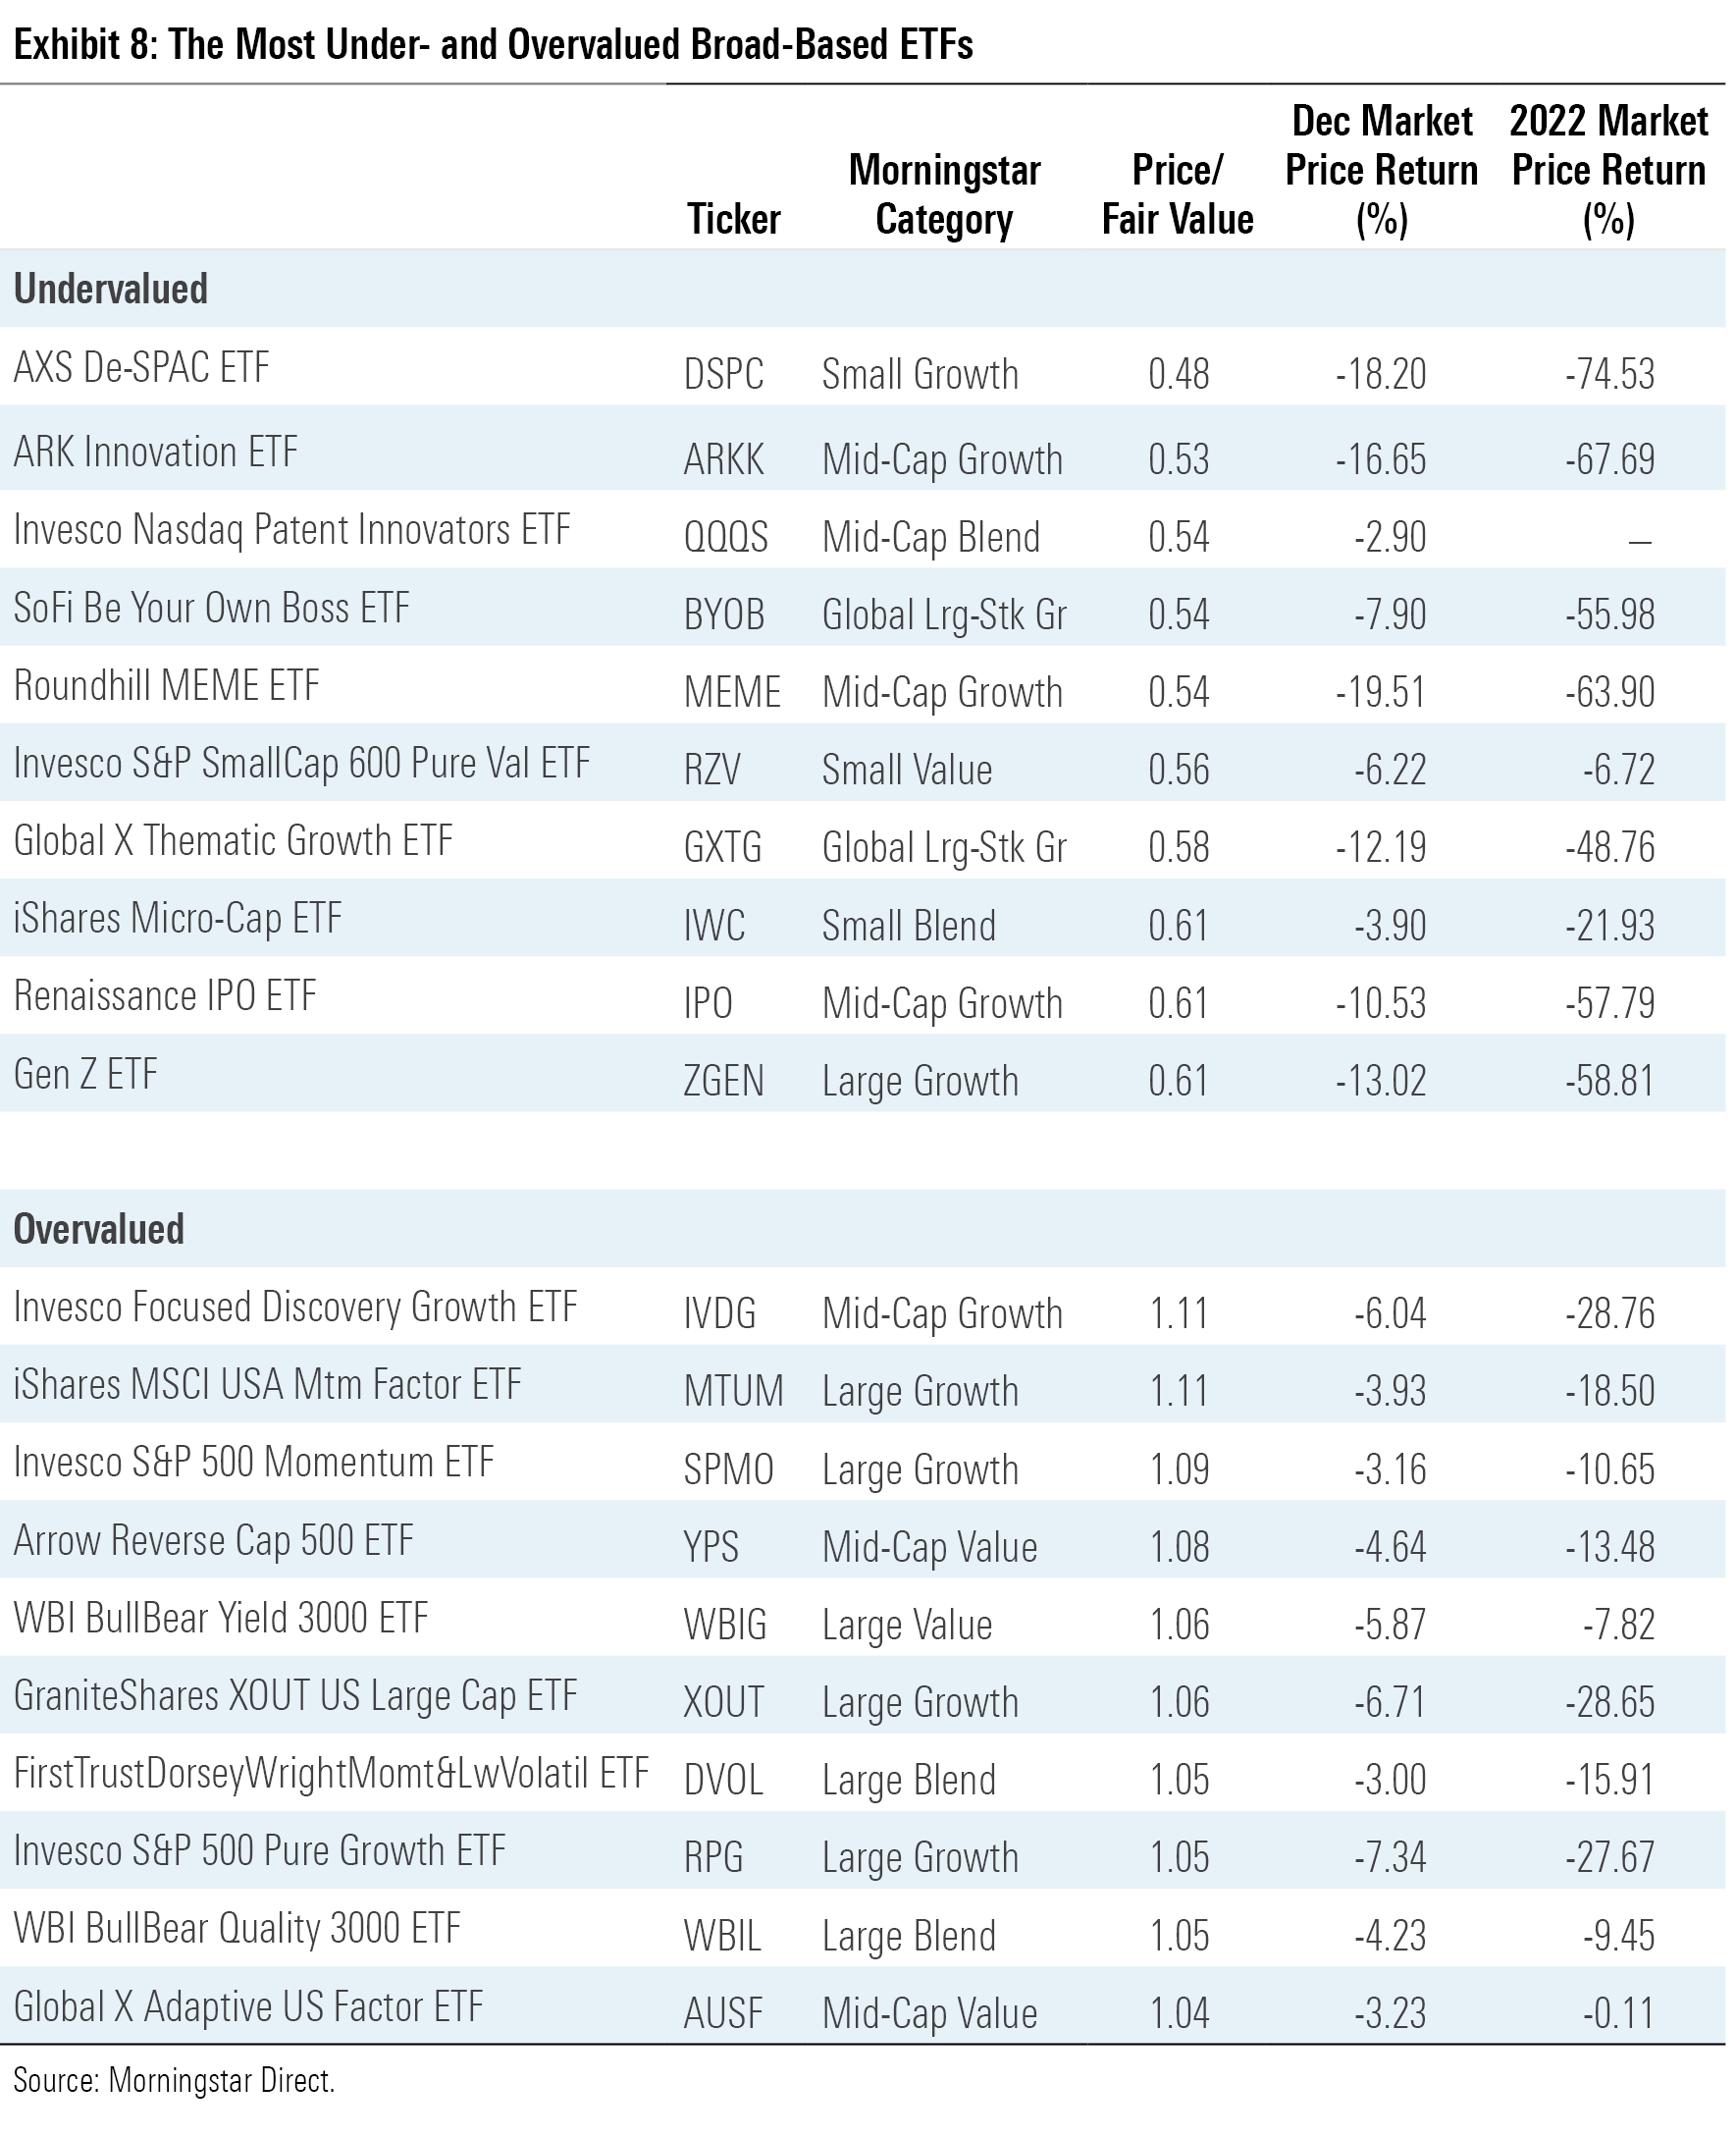 A table of the 10 most under- and overvalued ETFs in December 2022.